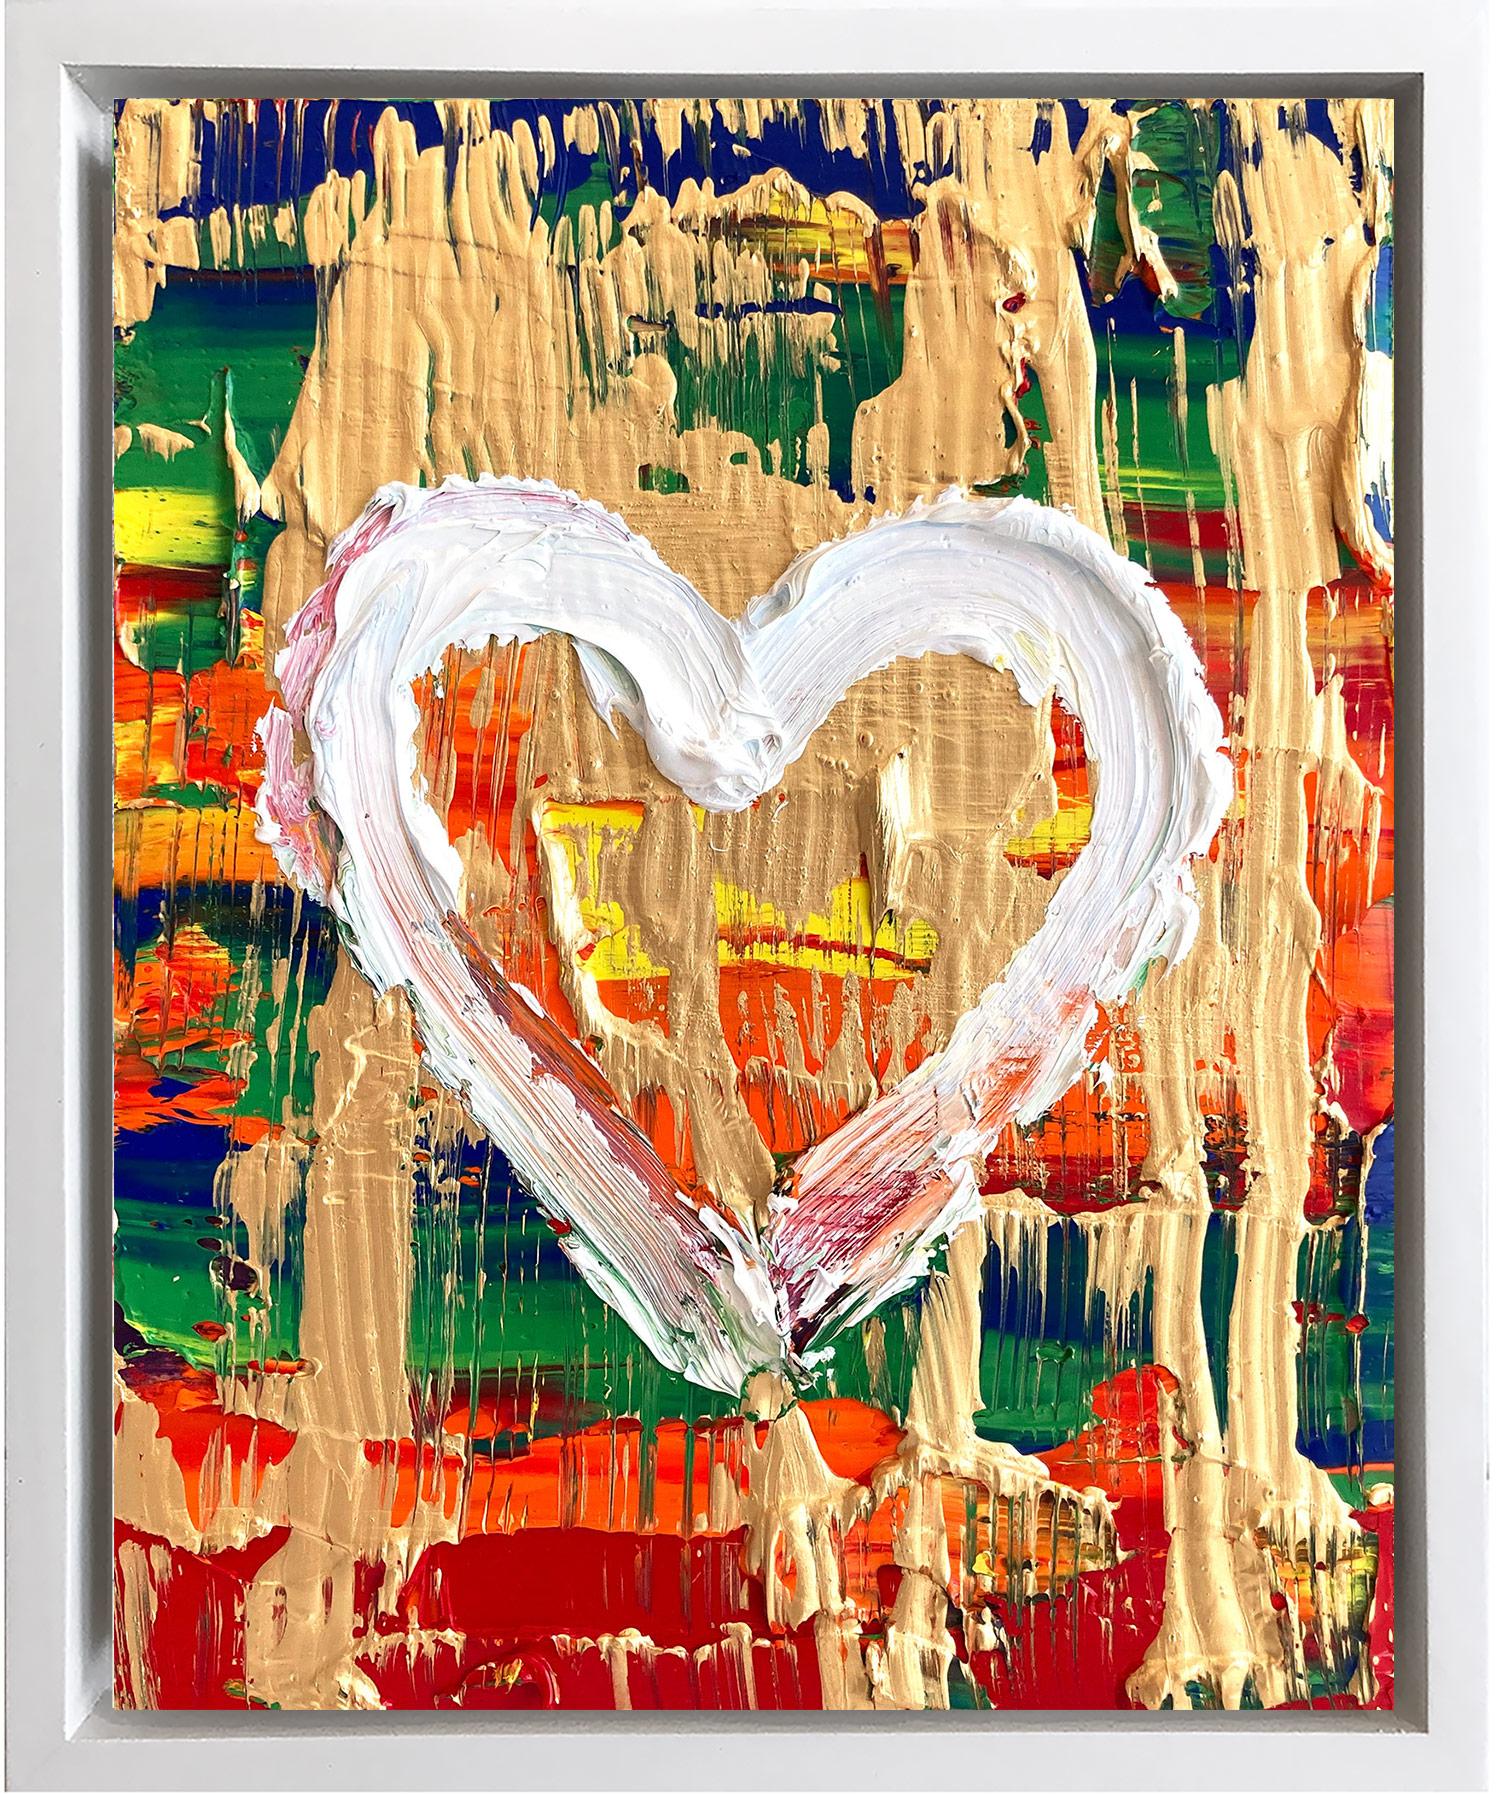 Cindy Shaoul Abstract Painting - "My Penny Lane Heart" Multicolor Contemporary Pop Art Oil Painting Floater Frame